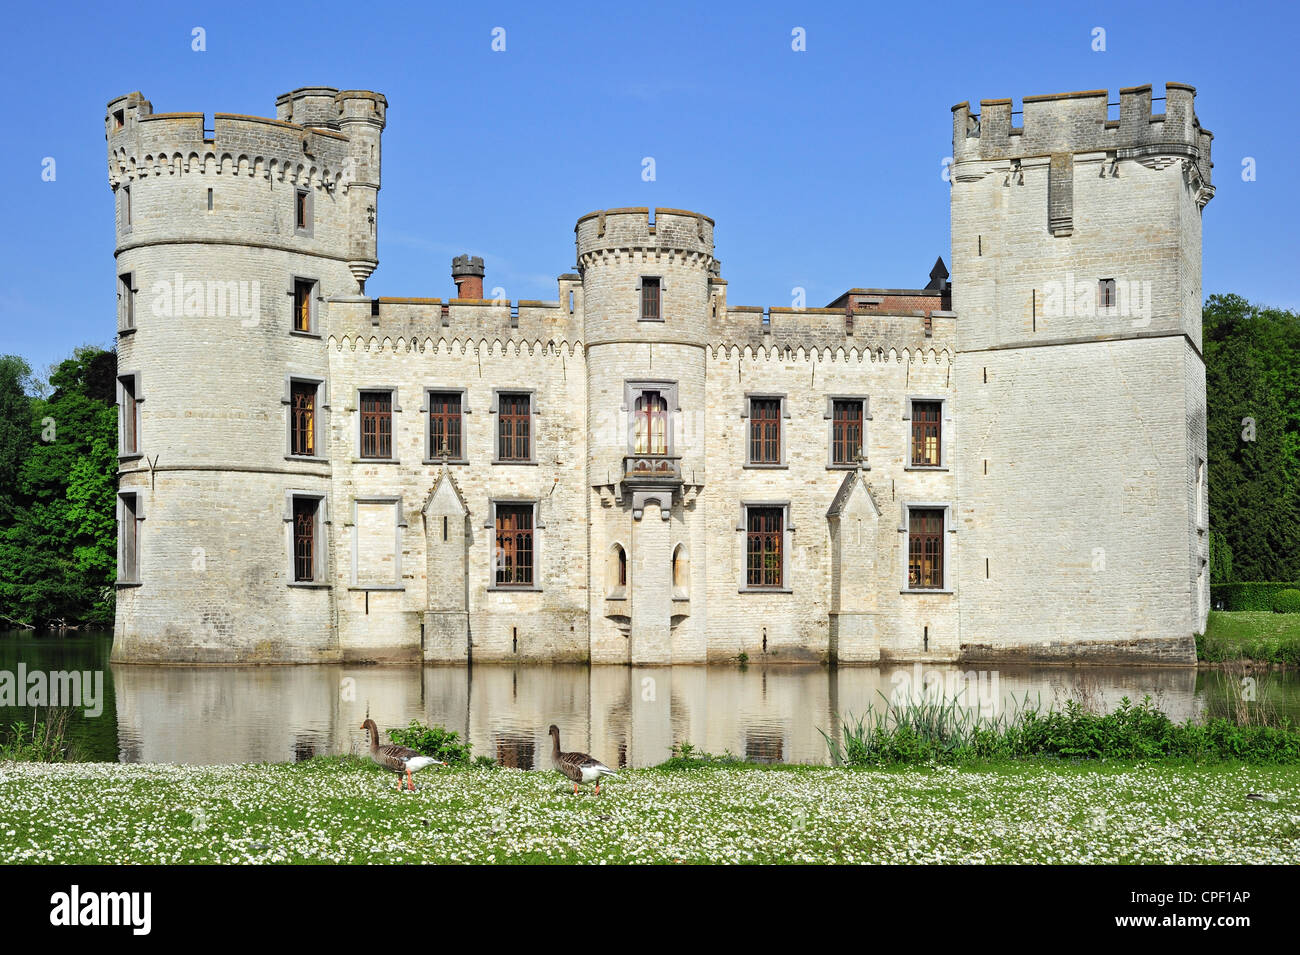 Bouchout Castle in Neo-Gothic style surrounded by moat in the National Botanic Garden of Belgium at Meise Stock Photo